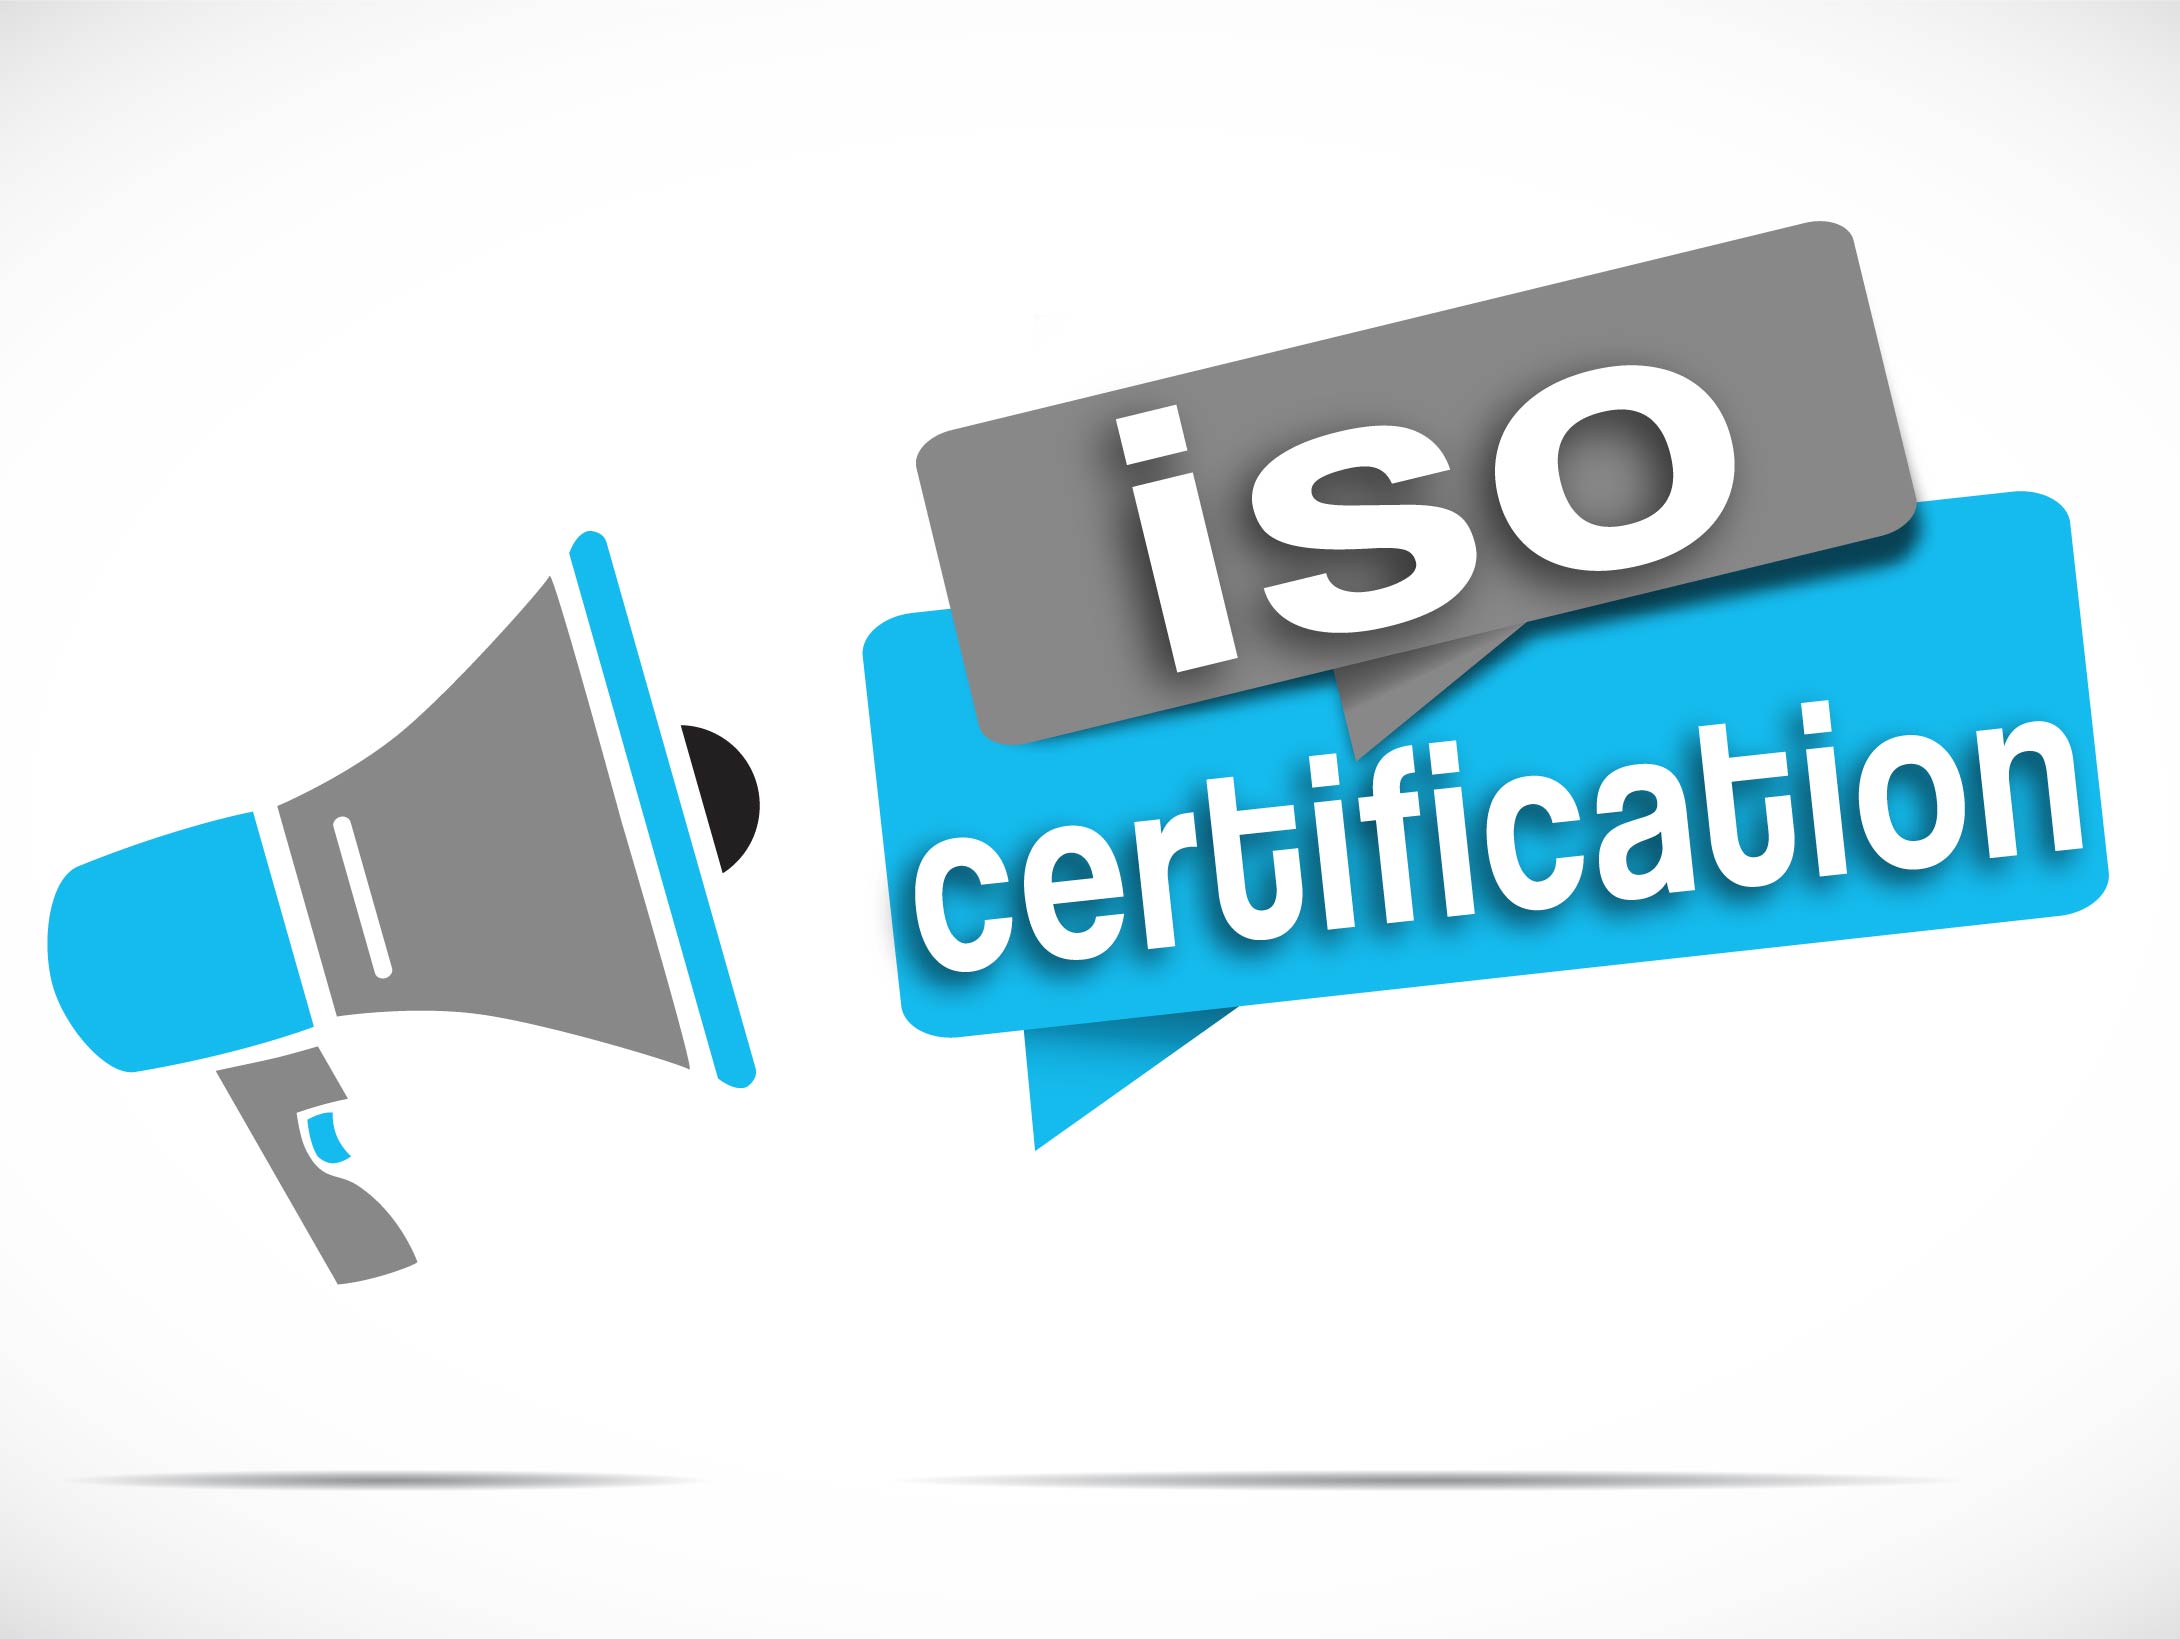 Locaria certified to ISO 9001 and ISO 17100 standards